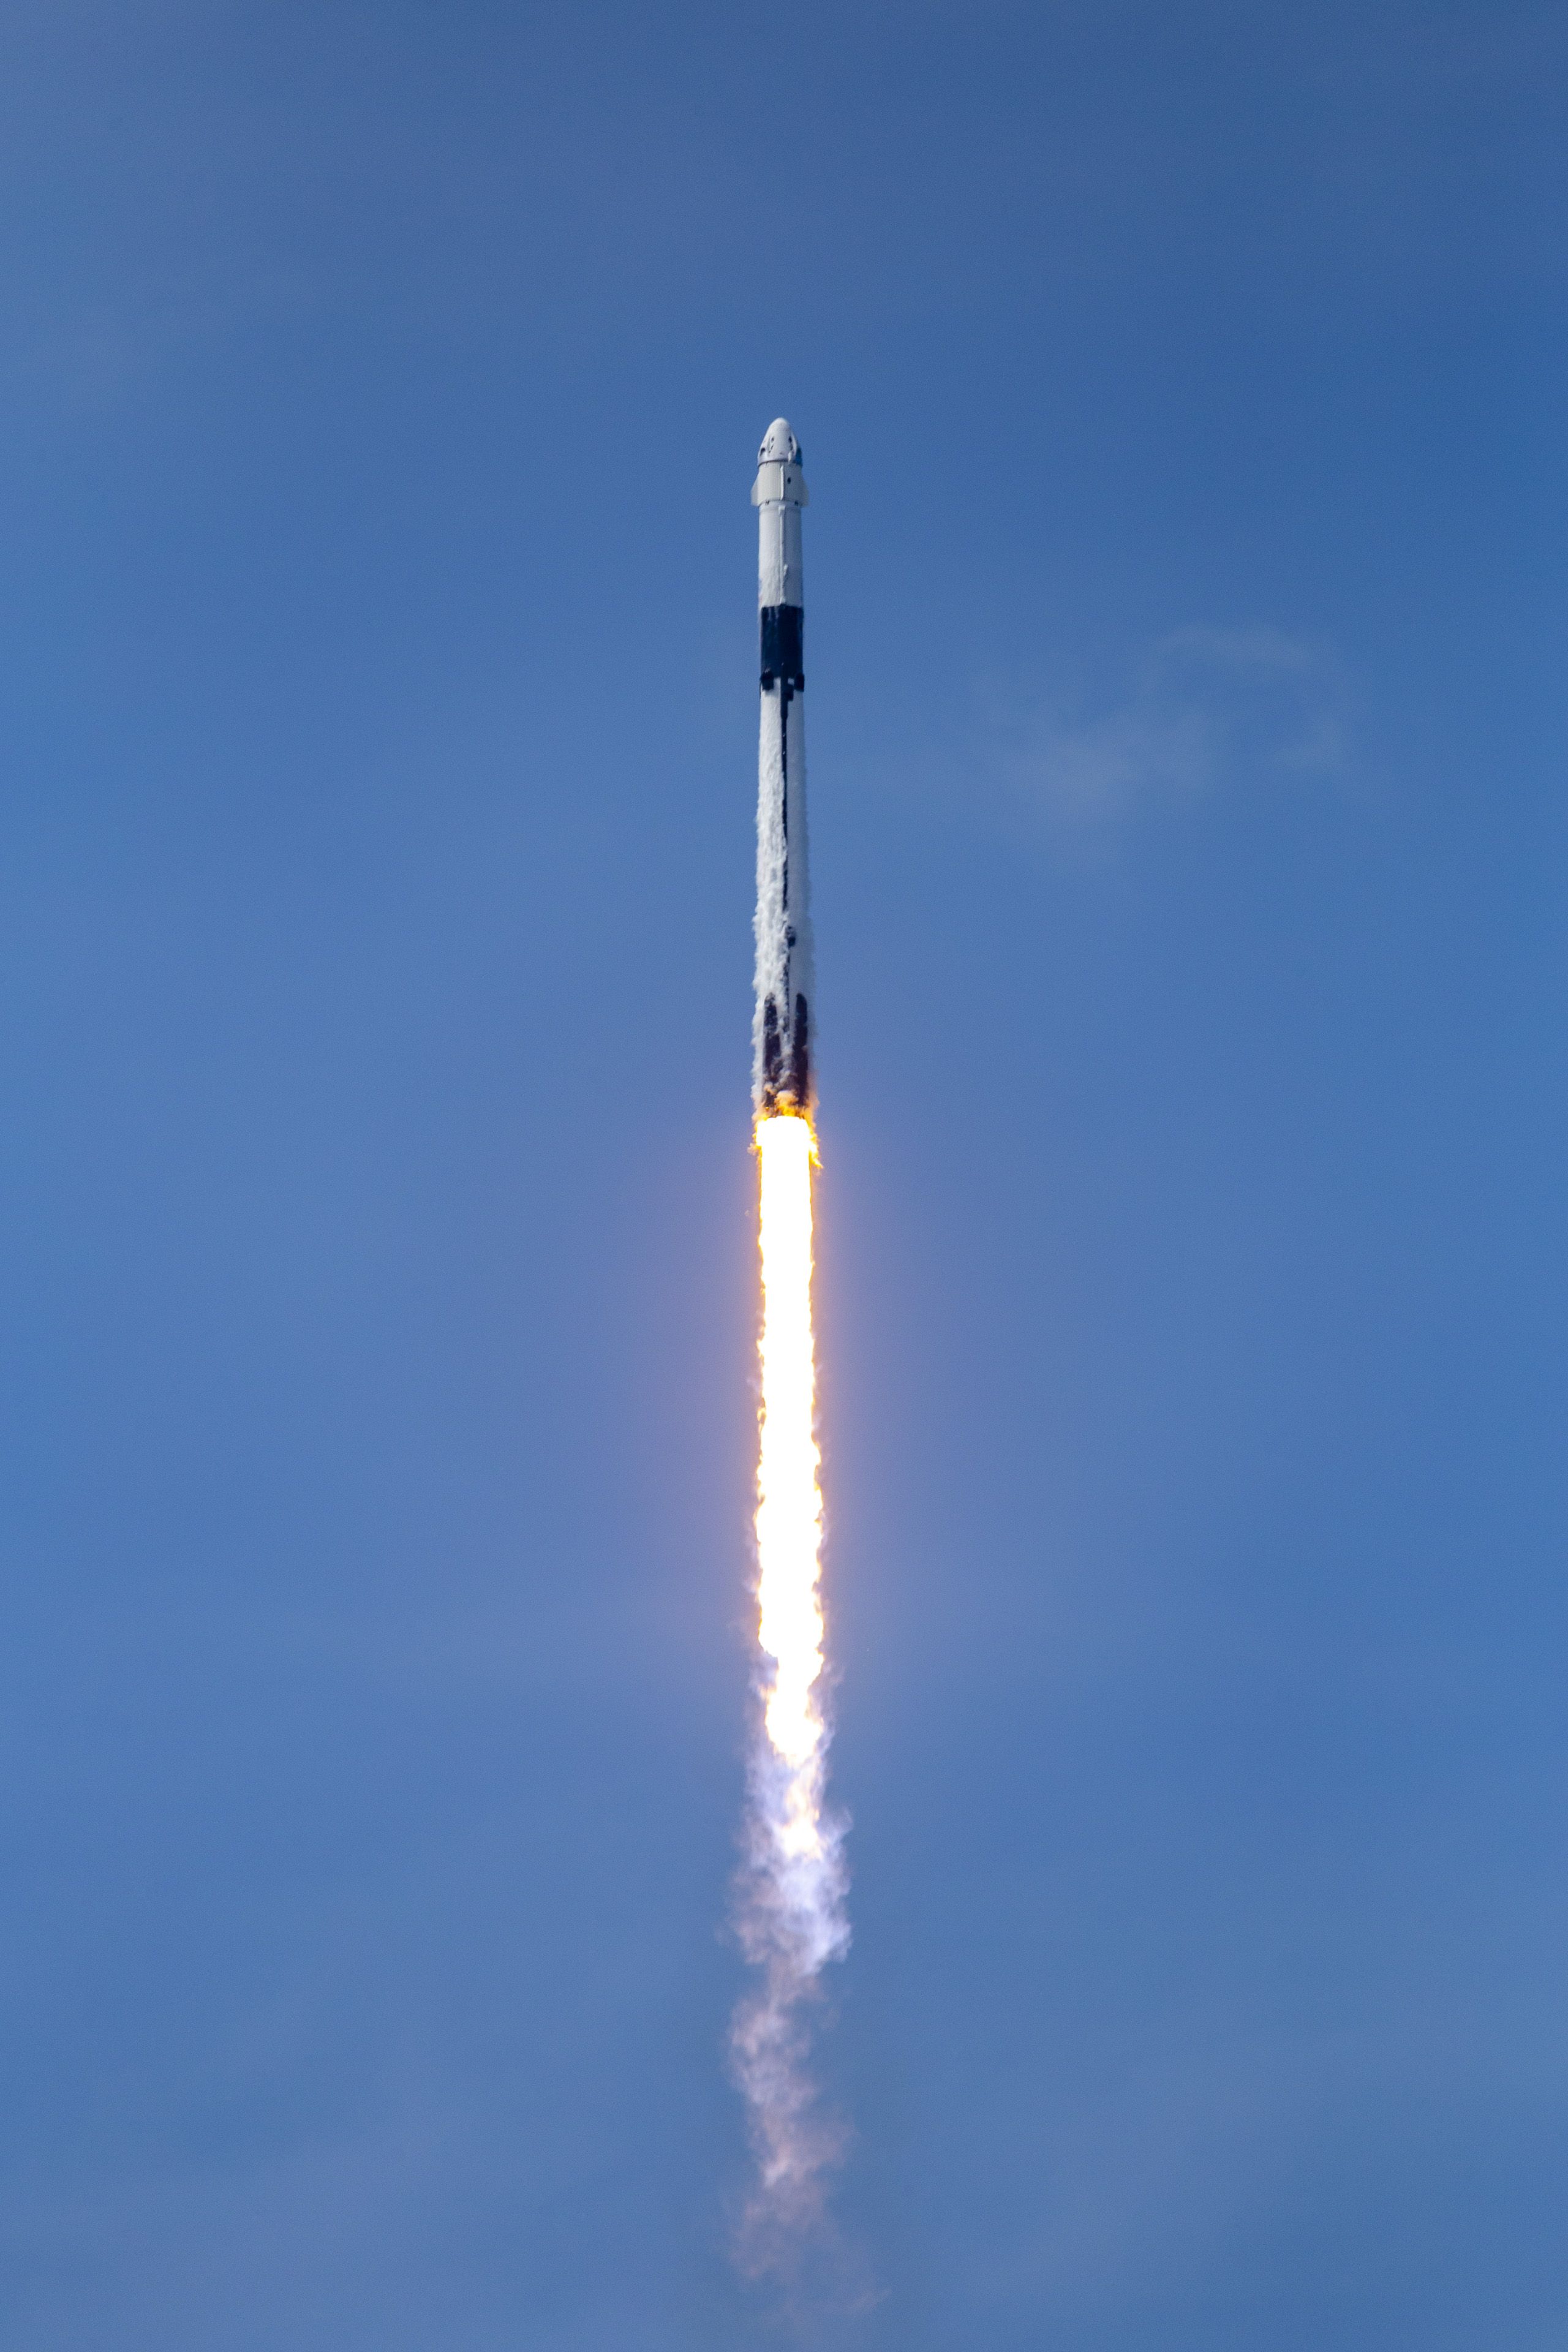 Falcon 9 Rocket On The Demo 2 Mission Spacex Wallpaper Phone. Spacex, Falcon 9 Rocket, Spacex Rocket